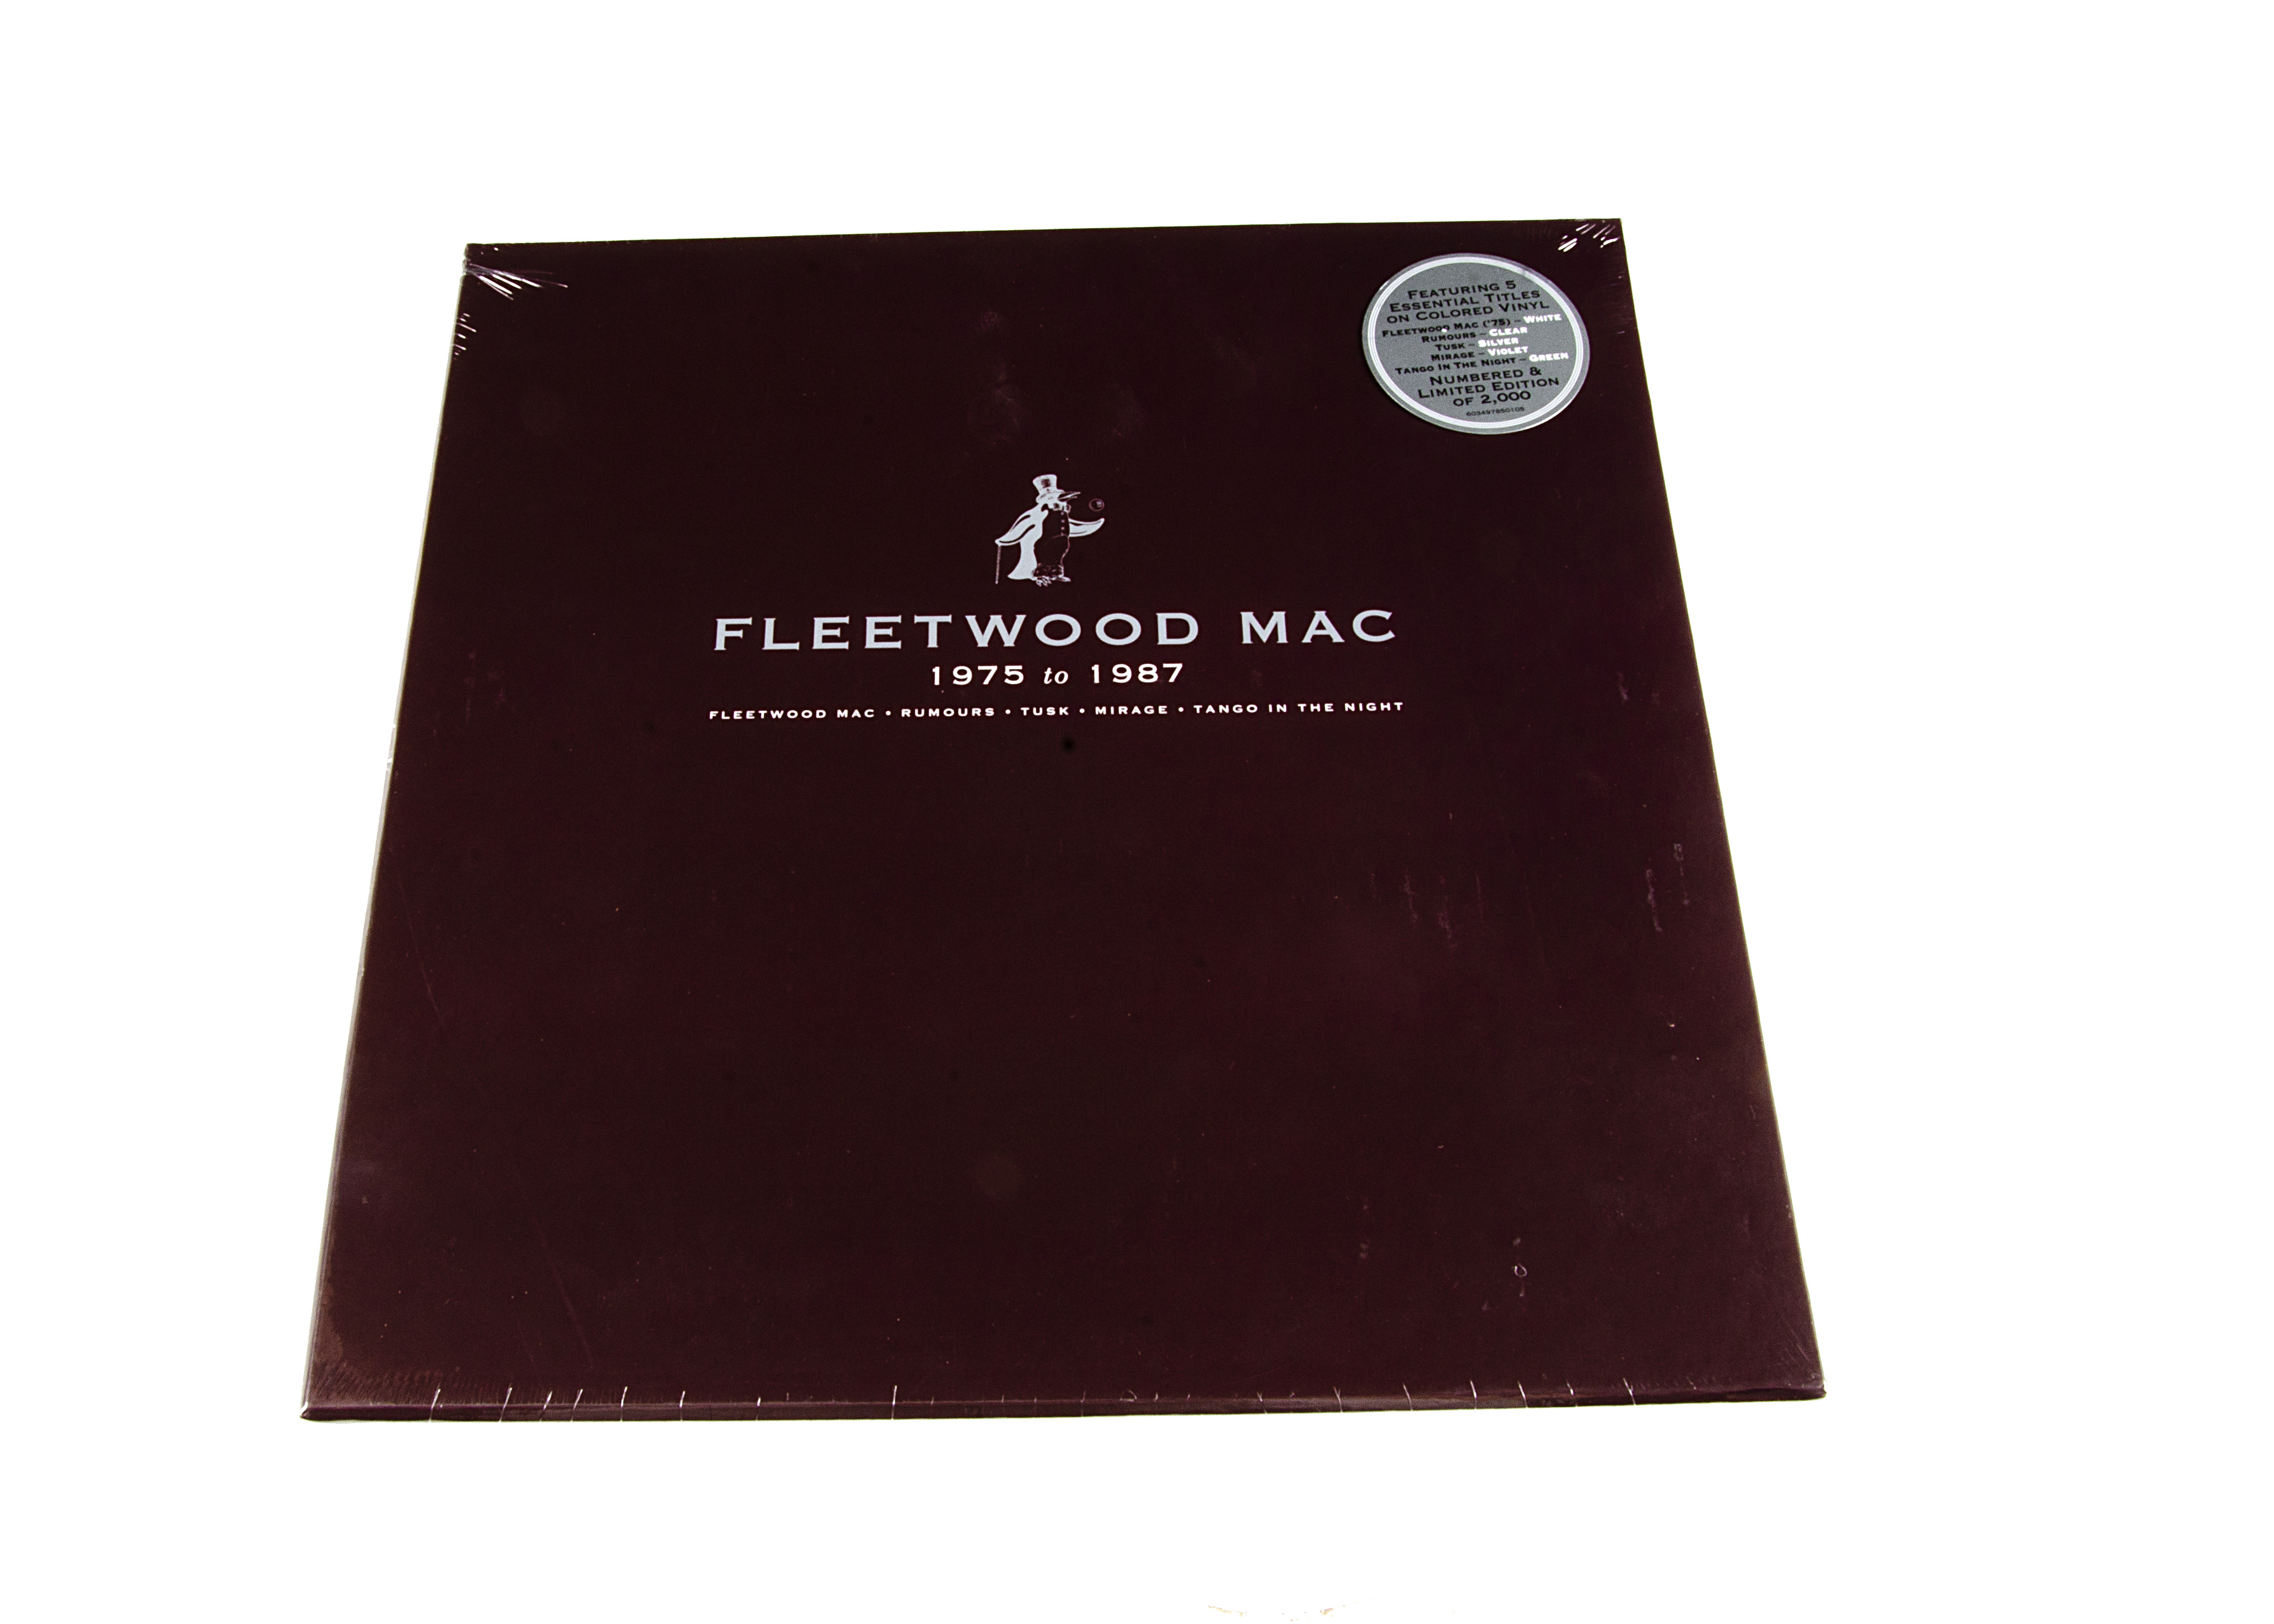 Fleetwood Mac Box Set, 1975 to 1987 - Limited Edition Numbered Box Set released 2019 on Reprise /